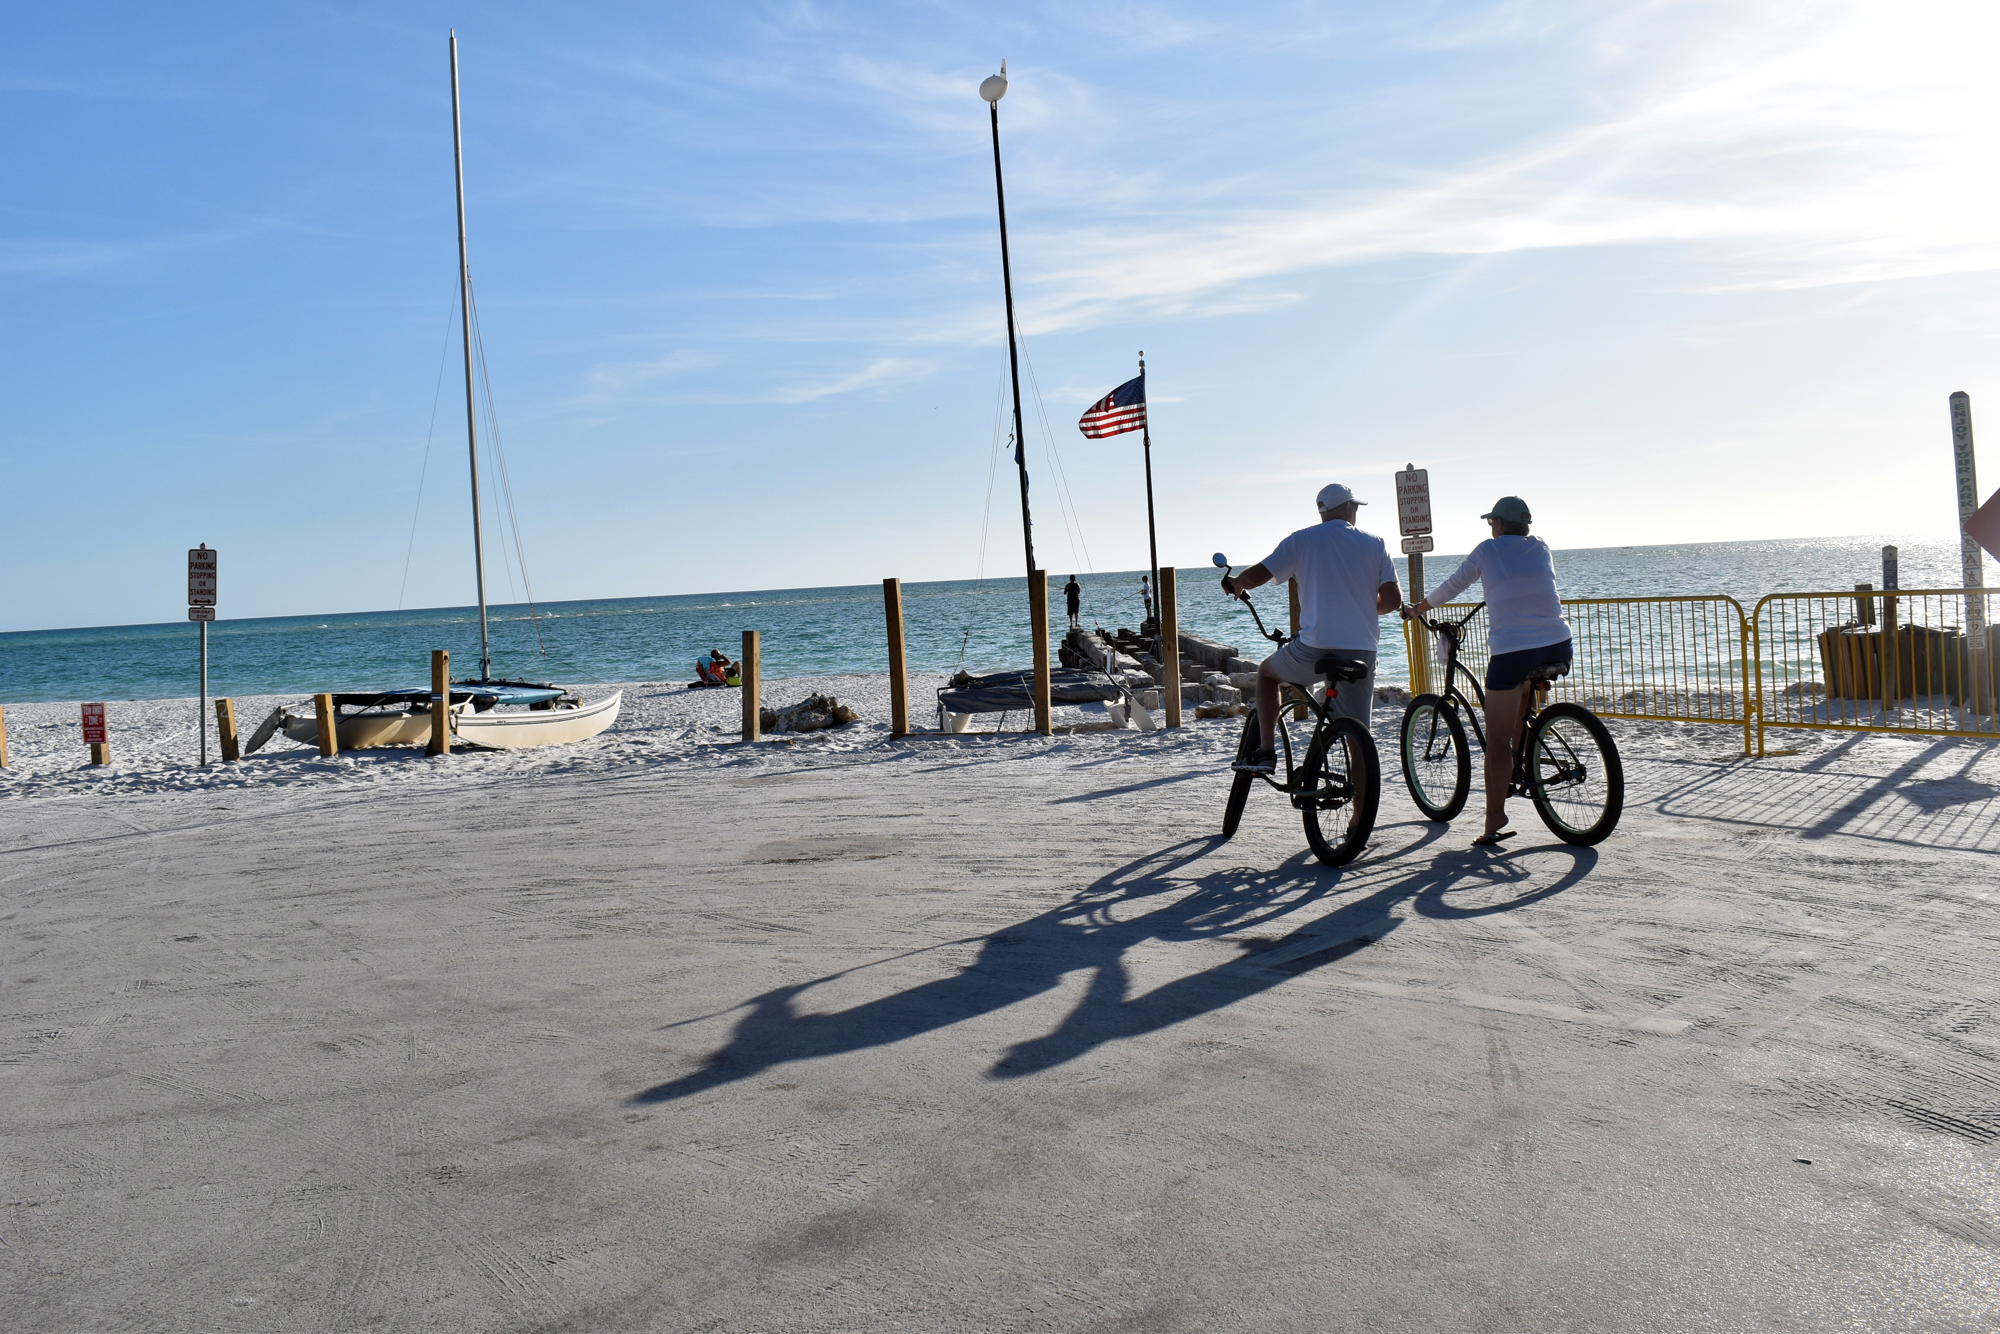 Despite the closures, people were fishing off the pier and lounging in the sand at Siesta Key Beach Access 2.